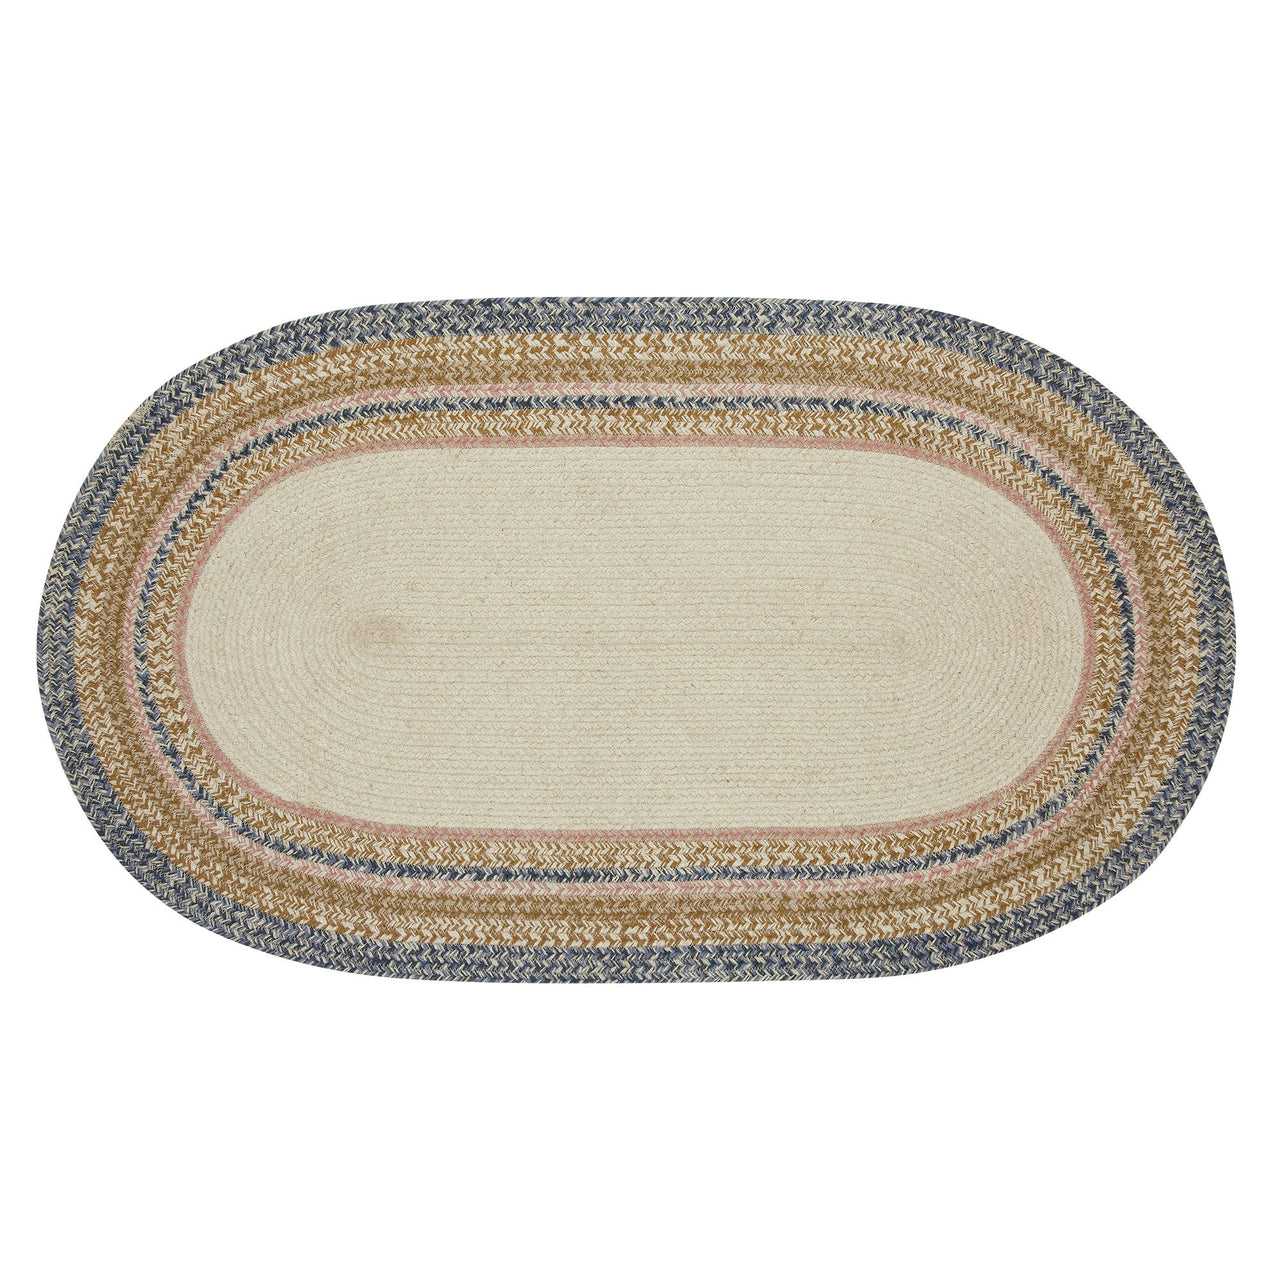 Kaila Happy Spring Jute Braided Rug Oval with Rug Pad 27"x48" VHC Brands